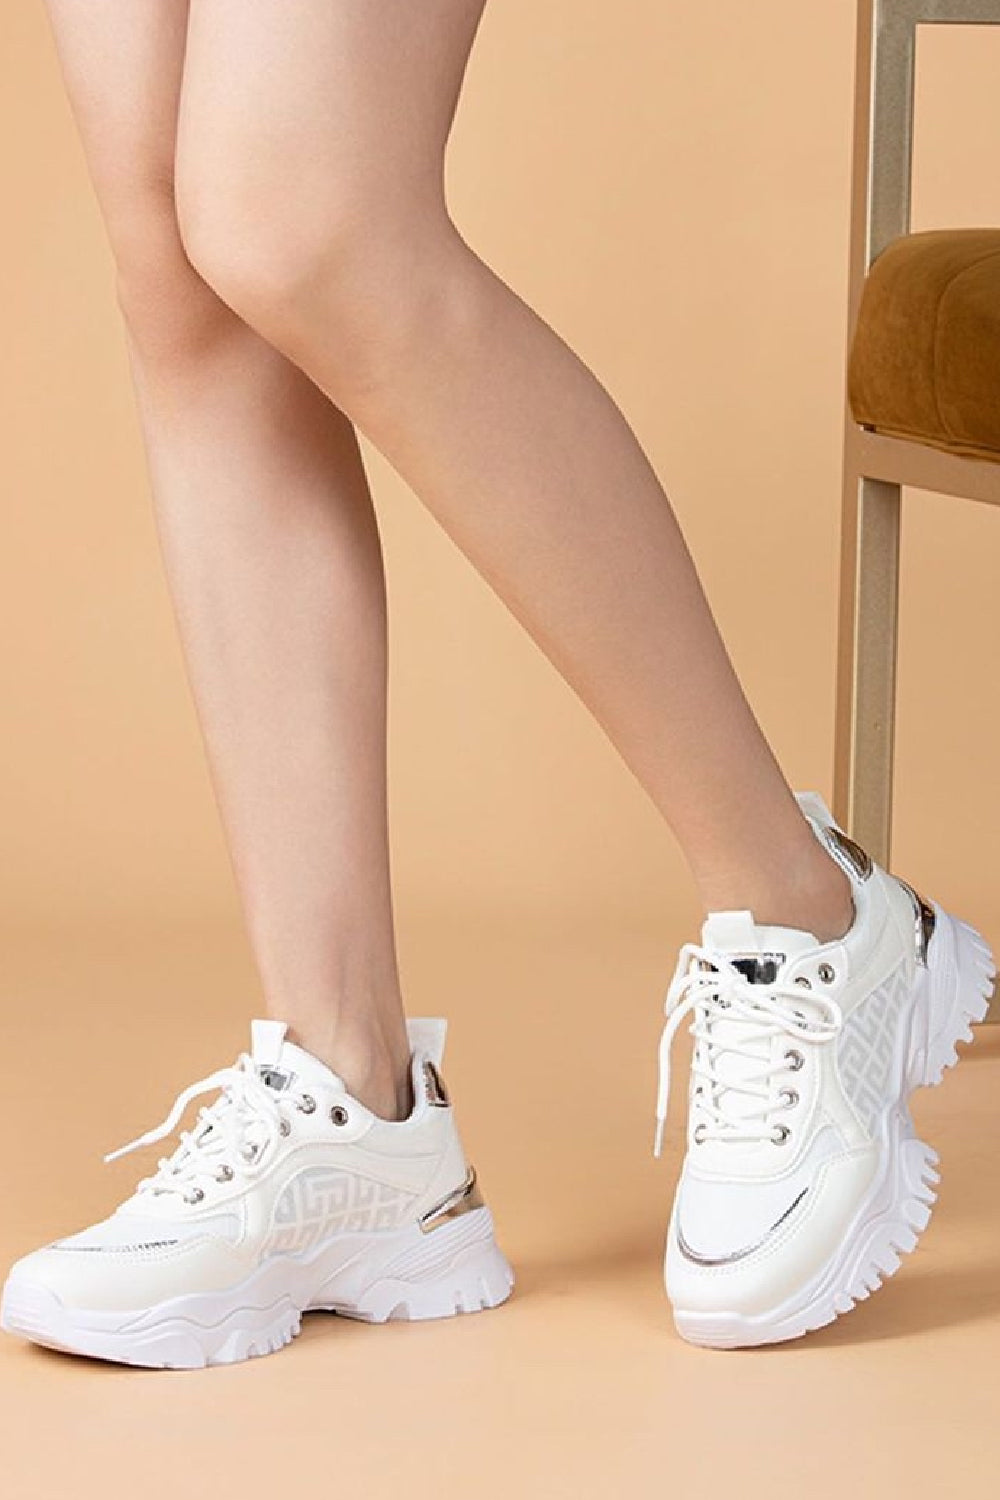 WHITE LACE UP FLAT CHUNKY SIDE DETAIL FASHION TRAINERS SHOES